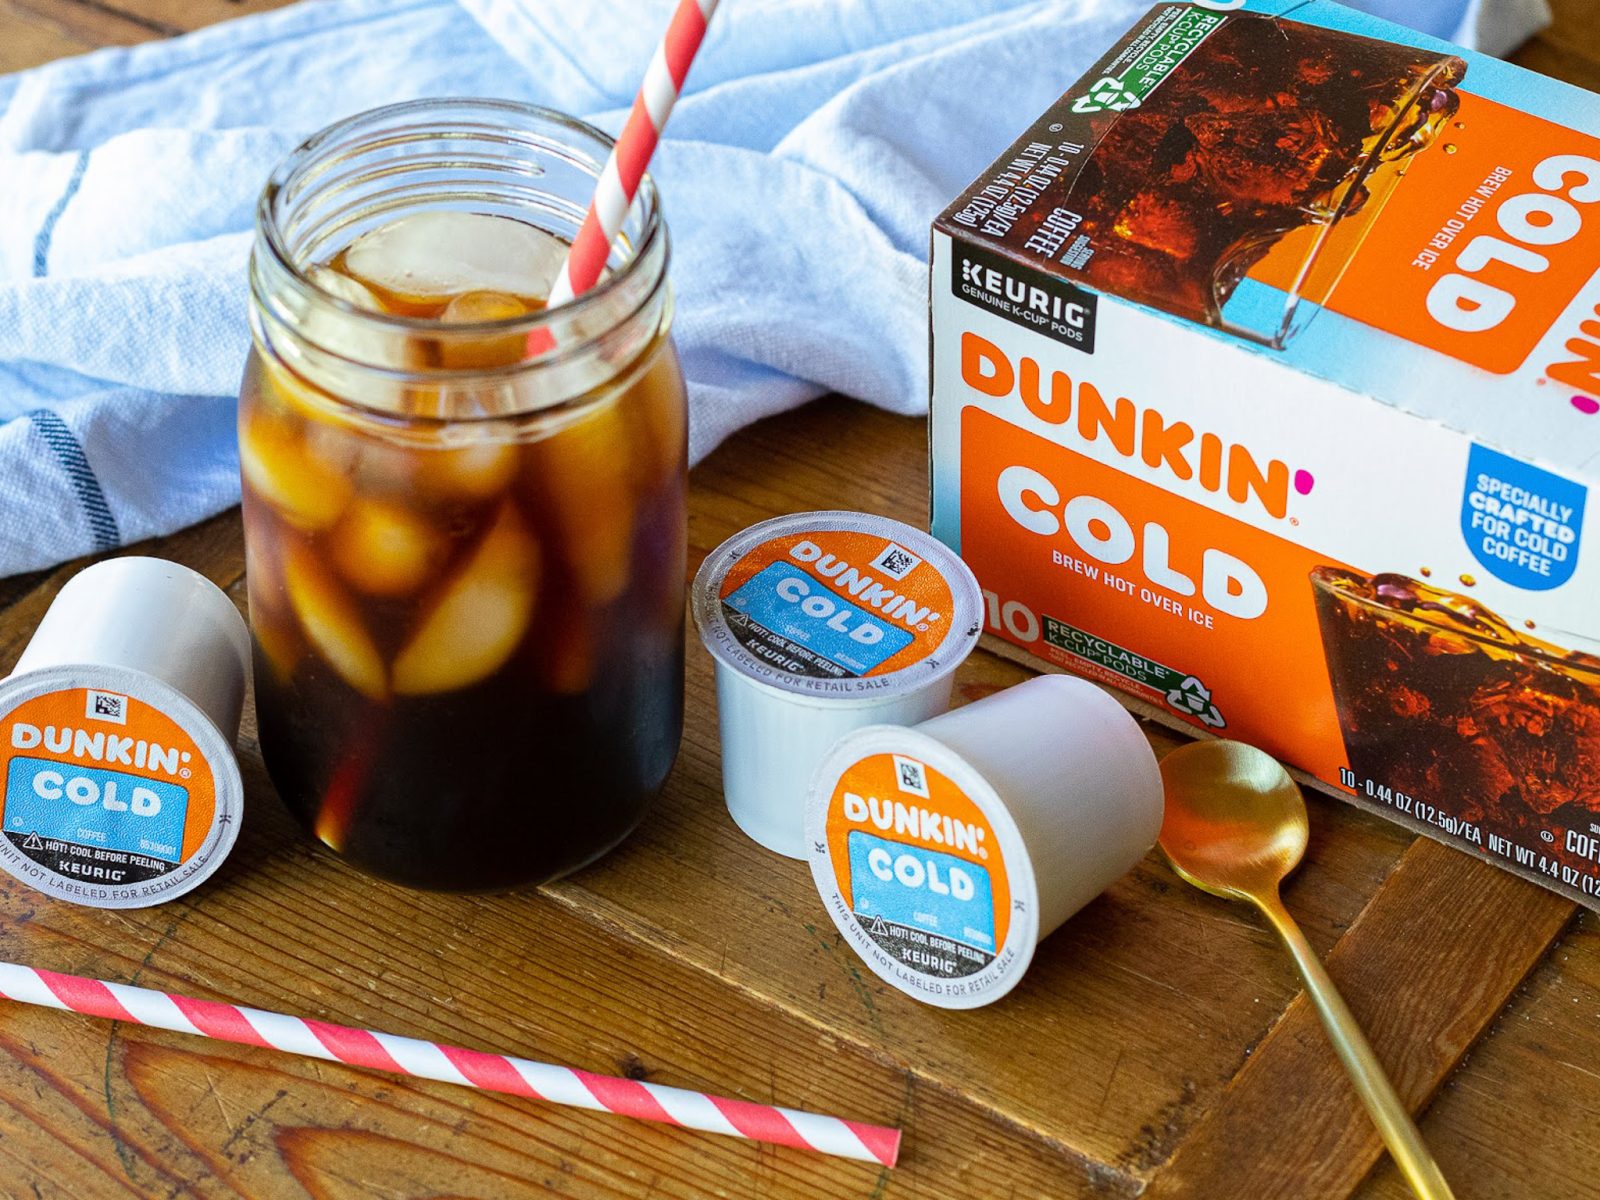 Dunkin’ Donuts Cold Coffee Products Are As Low As $2.49 At Kroger (Save $7)